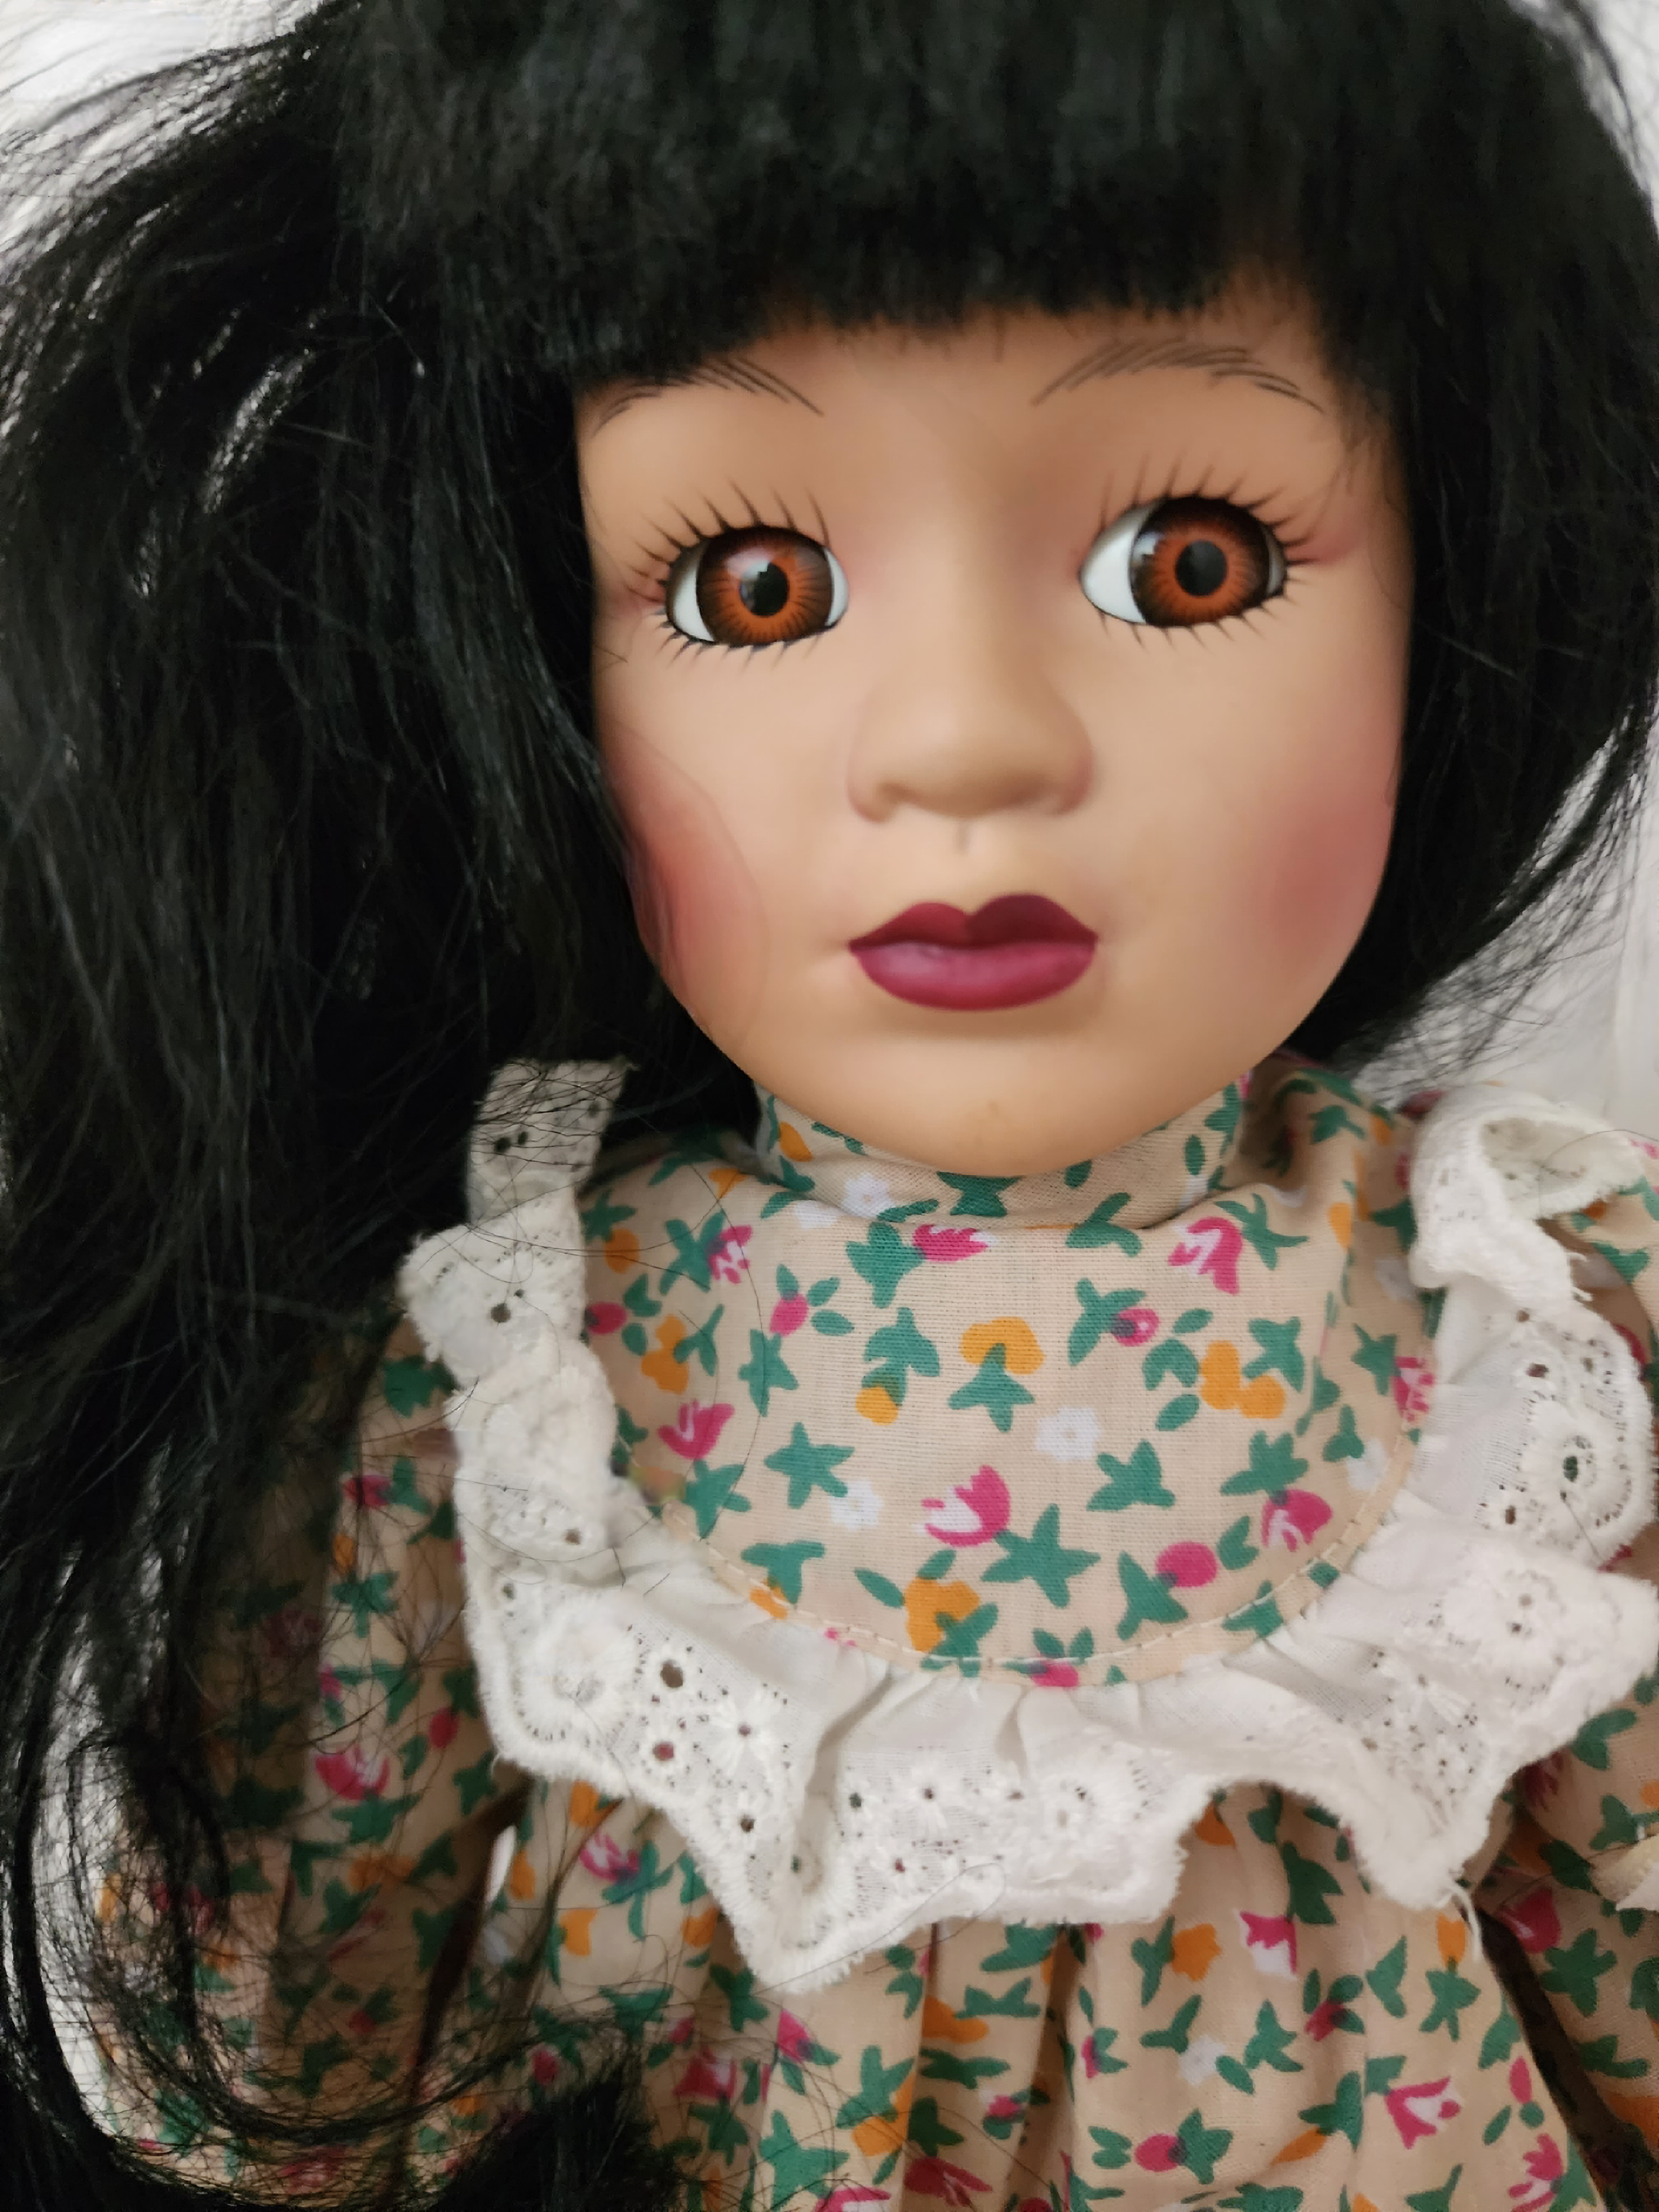 Cressida - Astral Travels through Space and Time! Spirited Doll or Remote Bridging